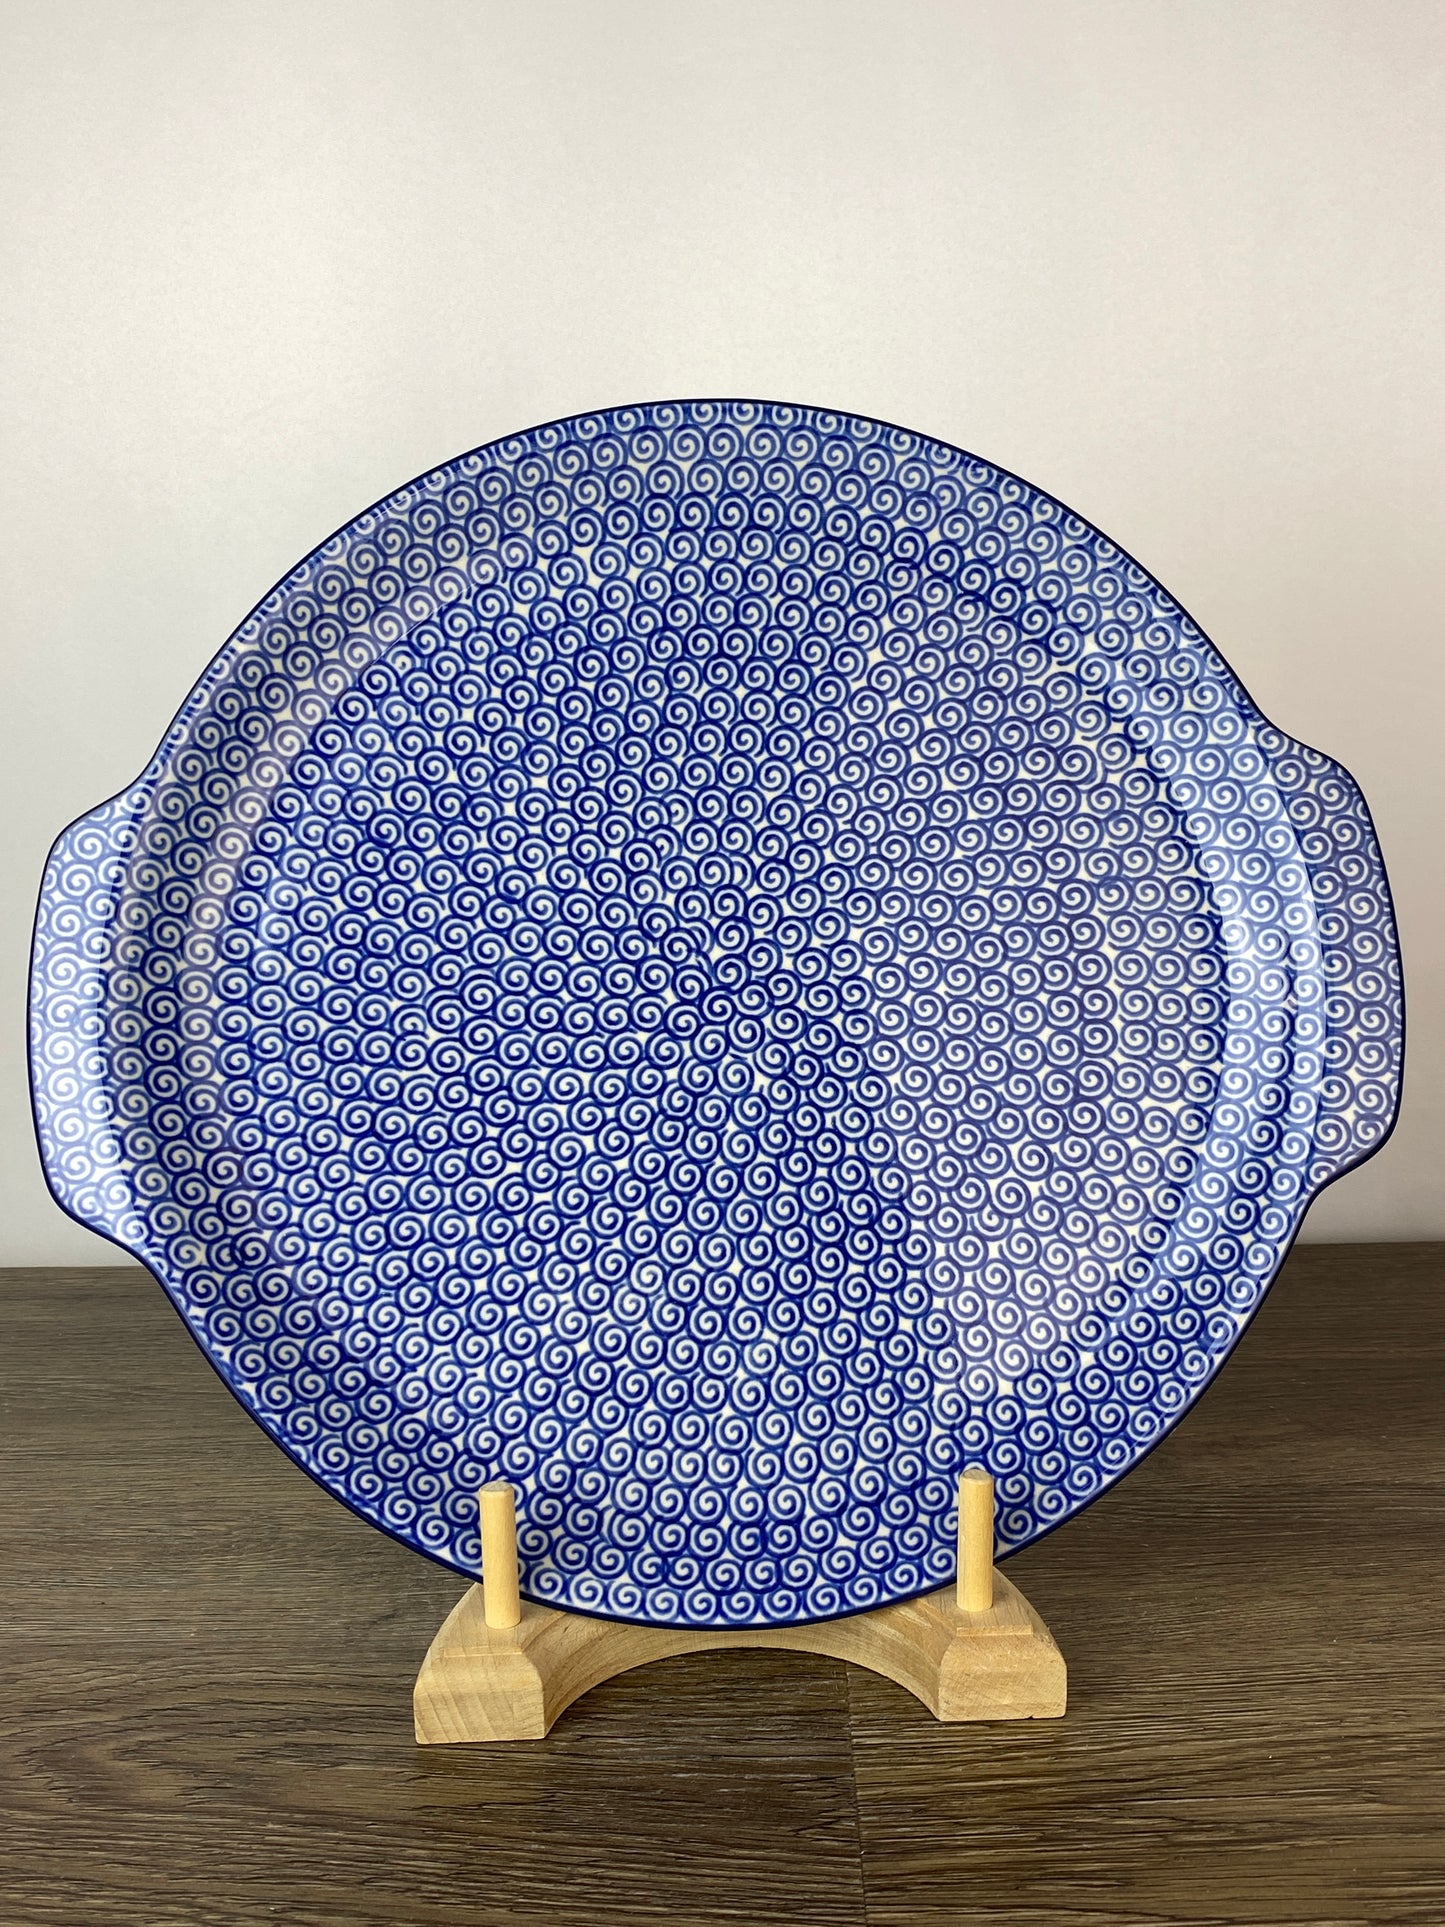 SALE Round Platter With Handles / Pizza Stone - Shape 151 - Pattern 26